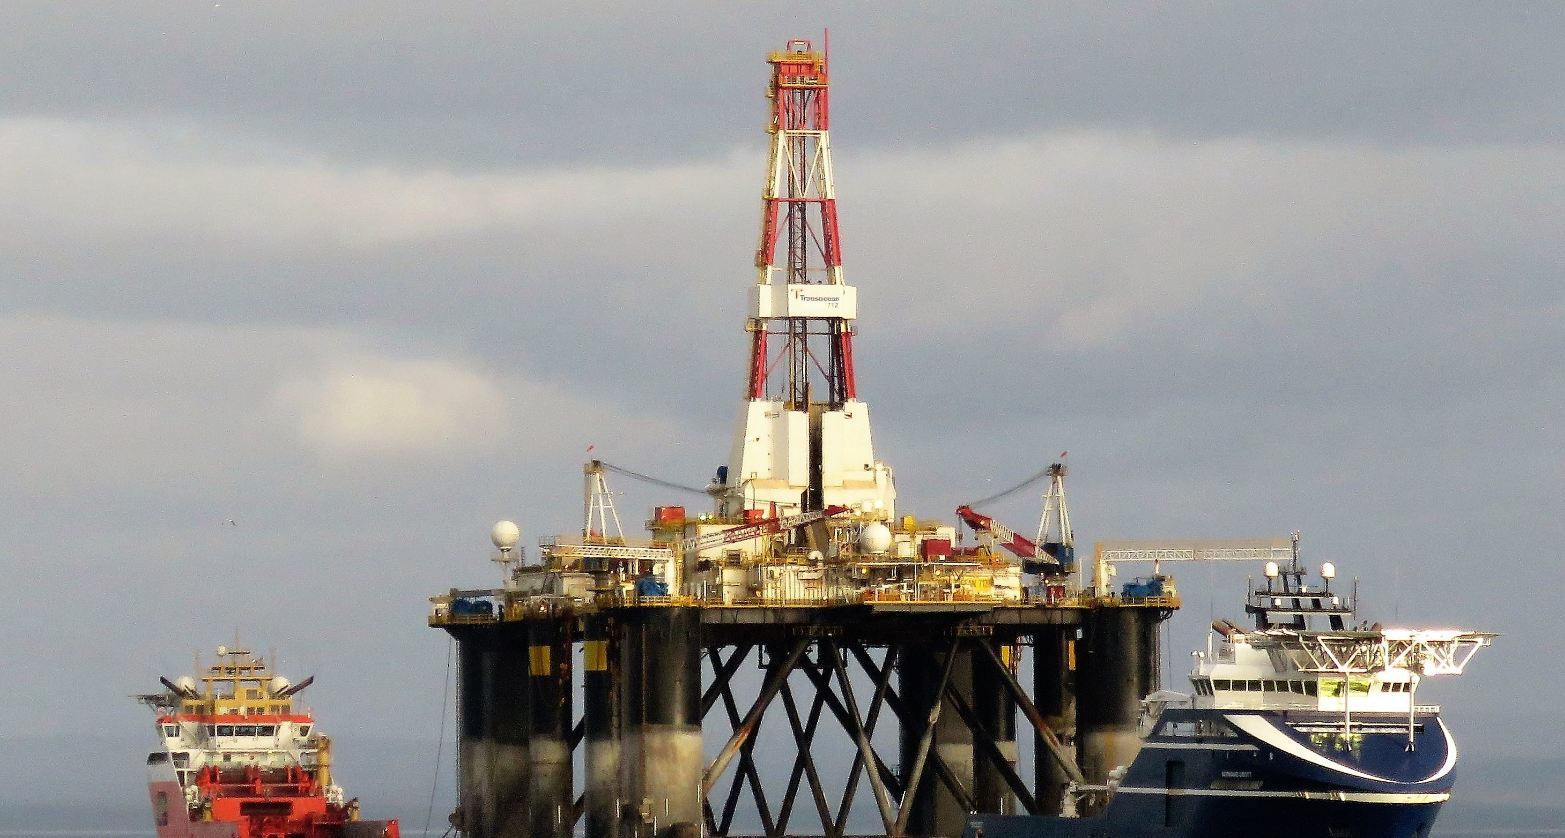 A file photo of Transocean 712